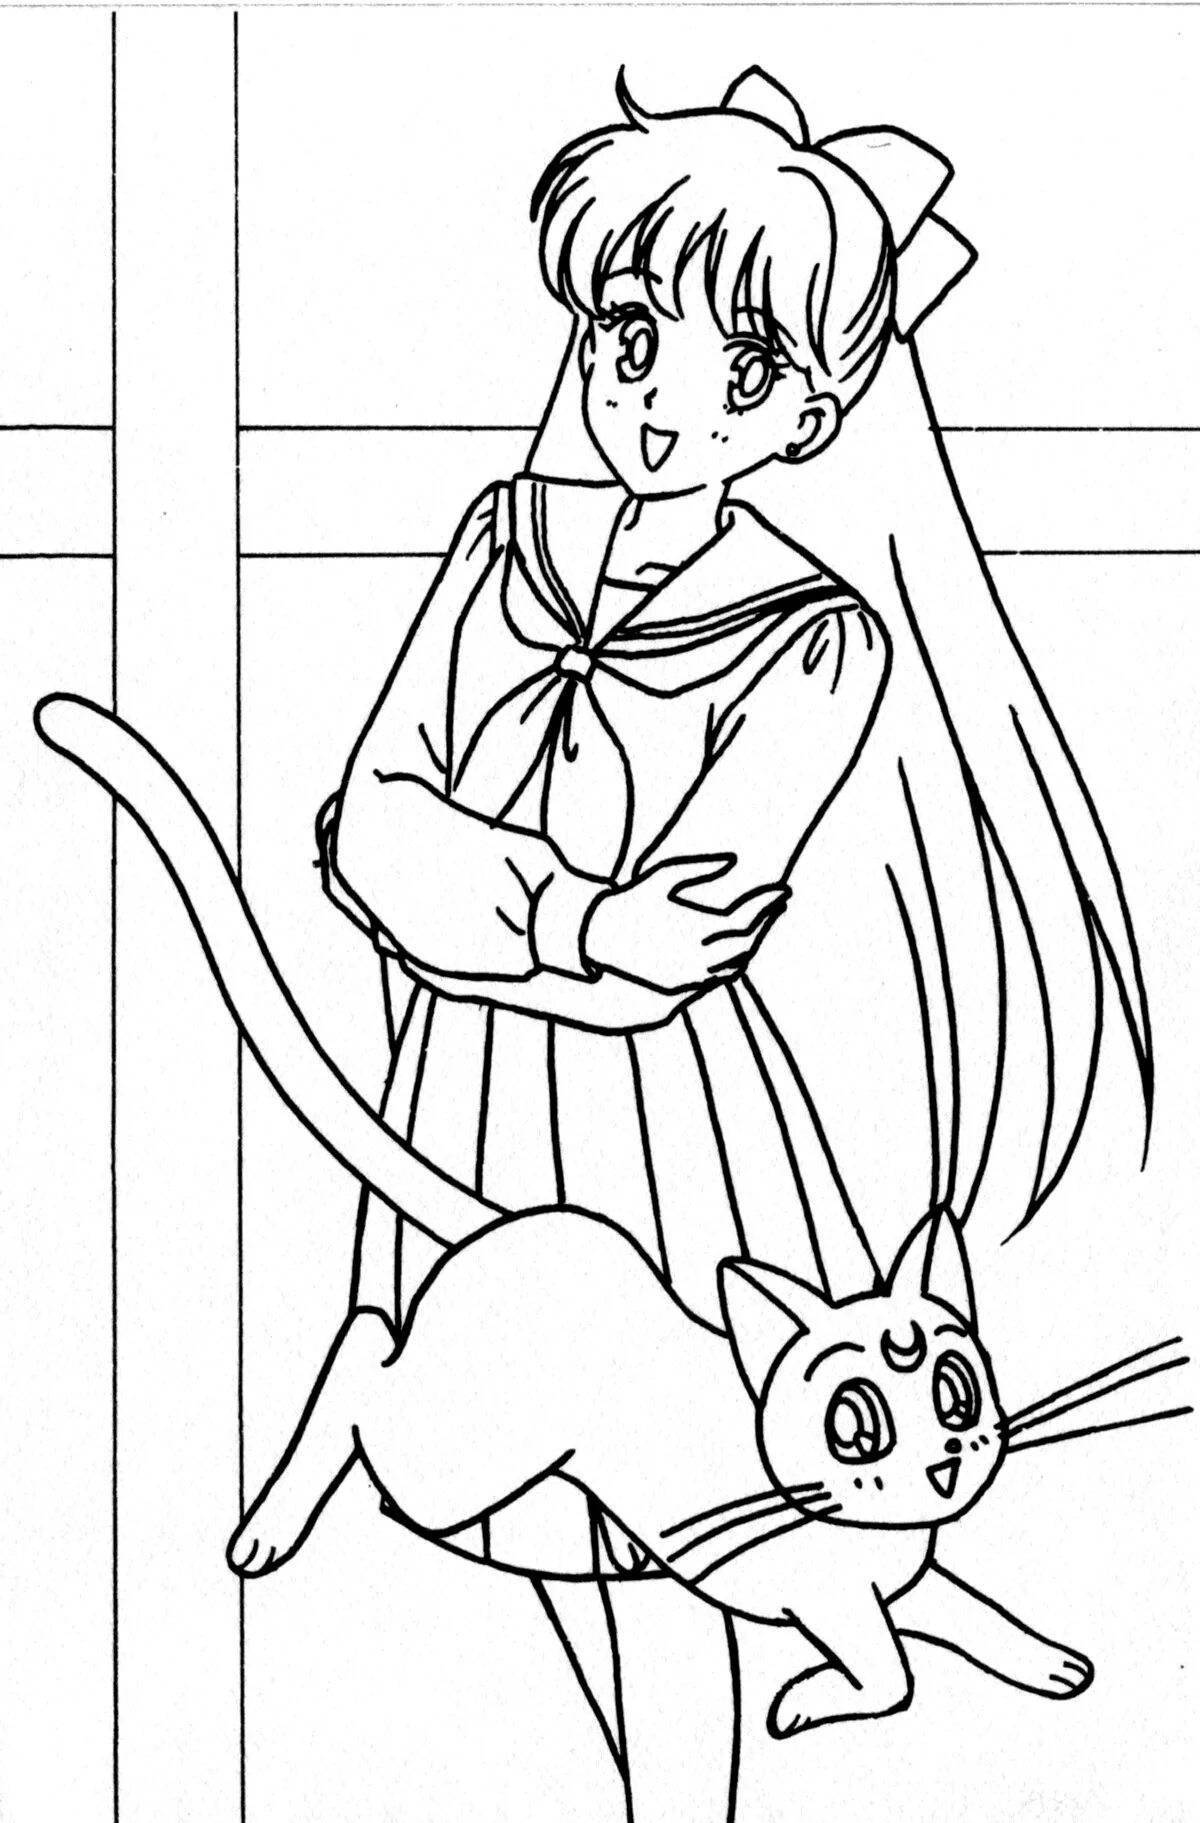 Cute anime kitty coloring page